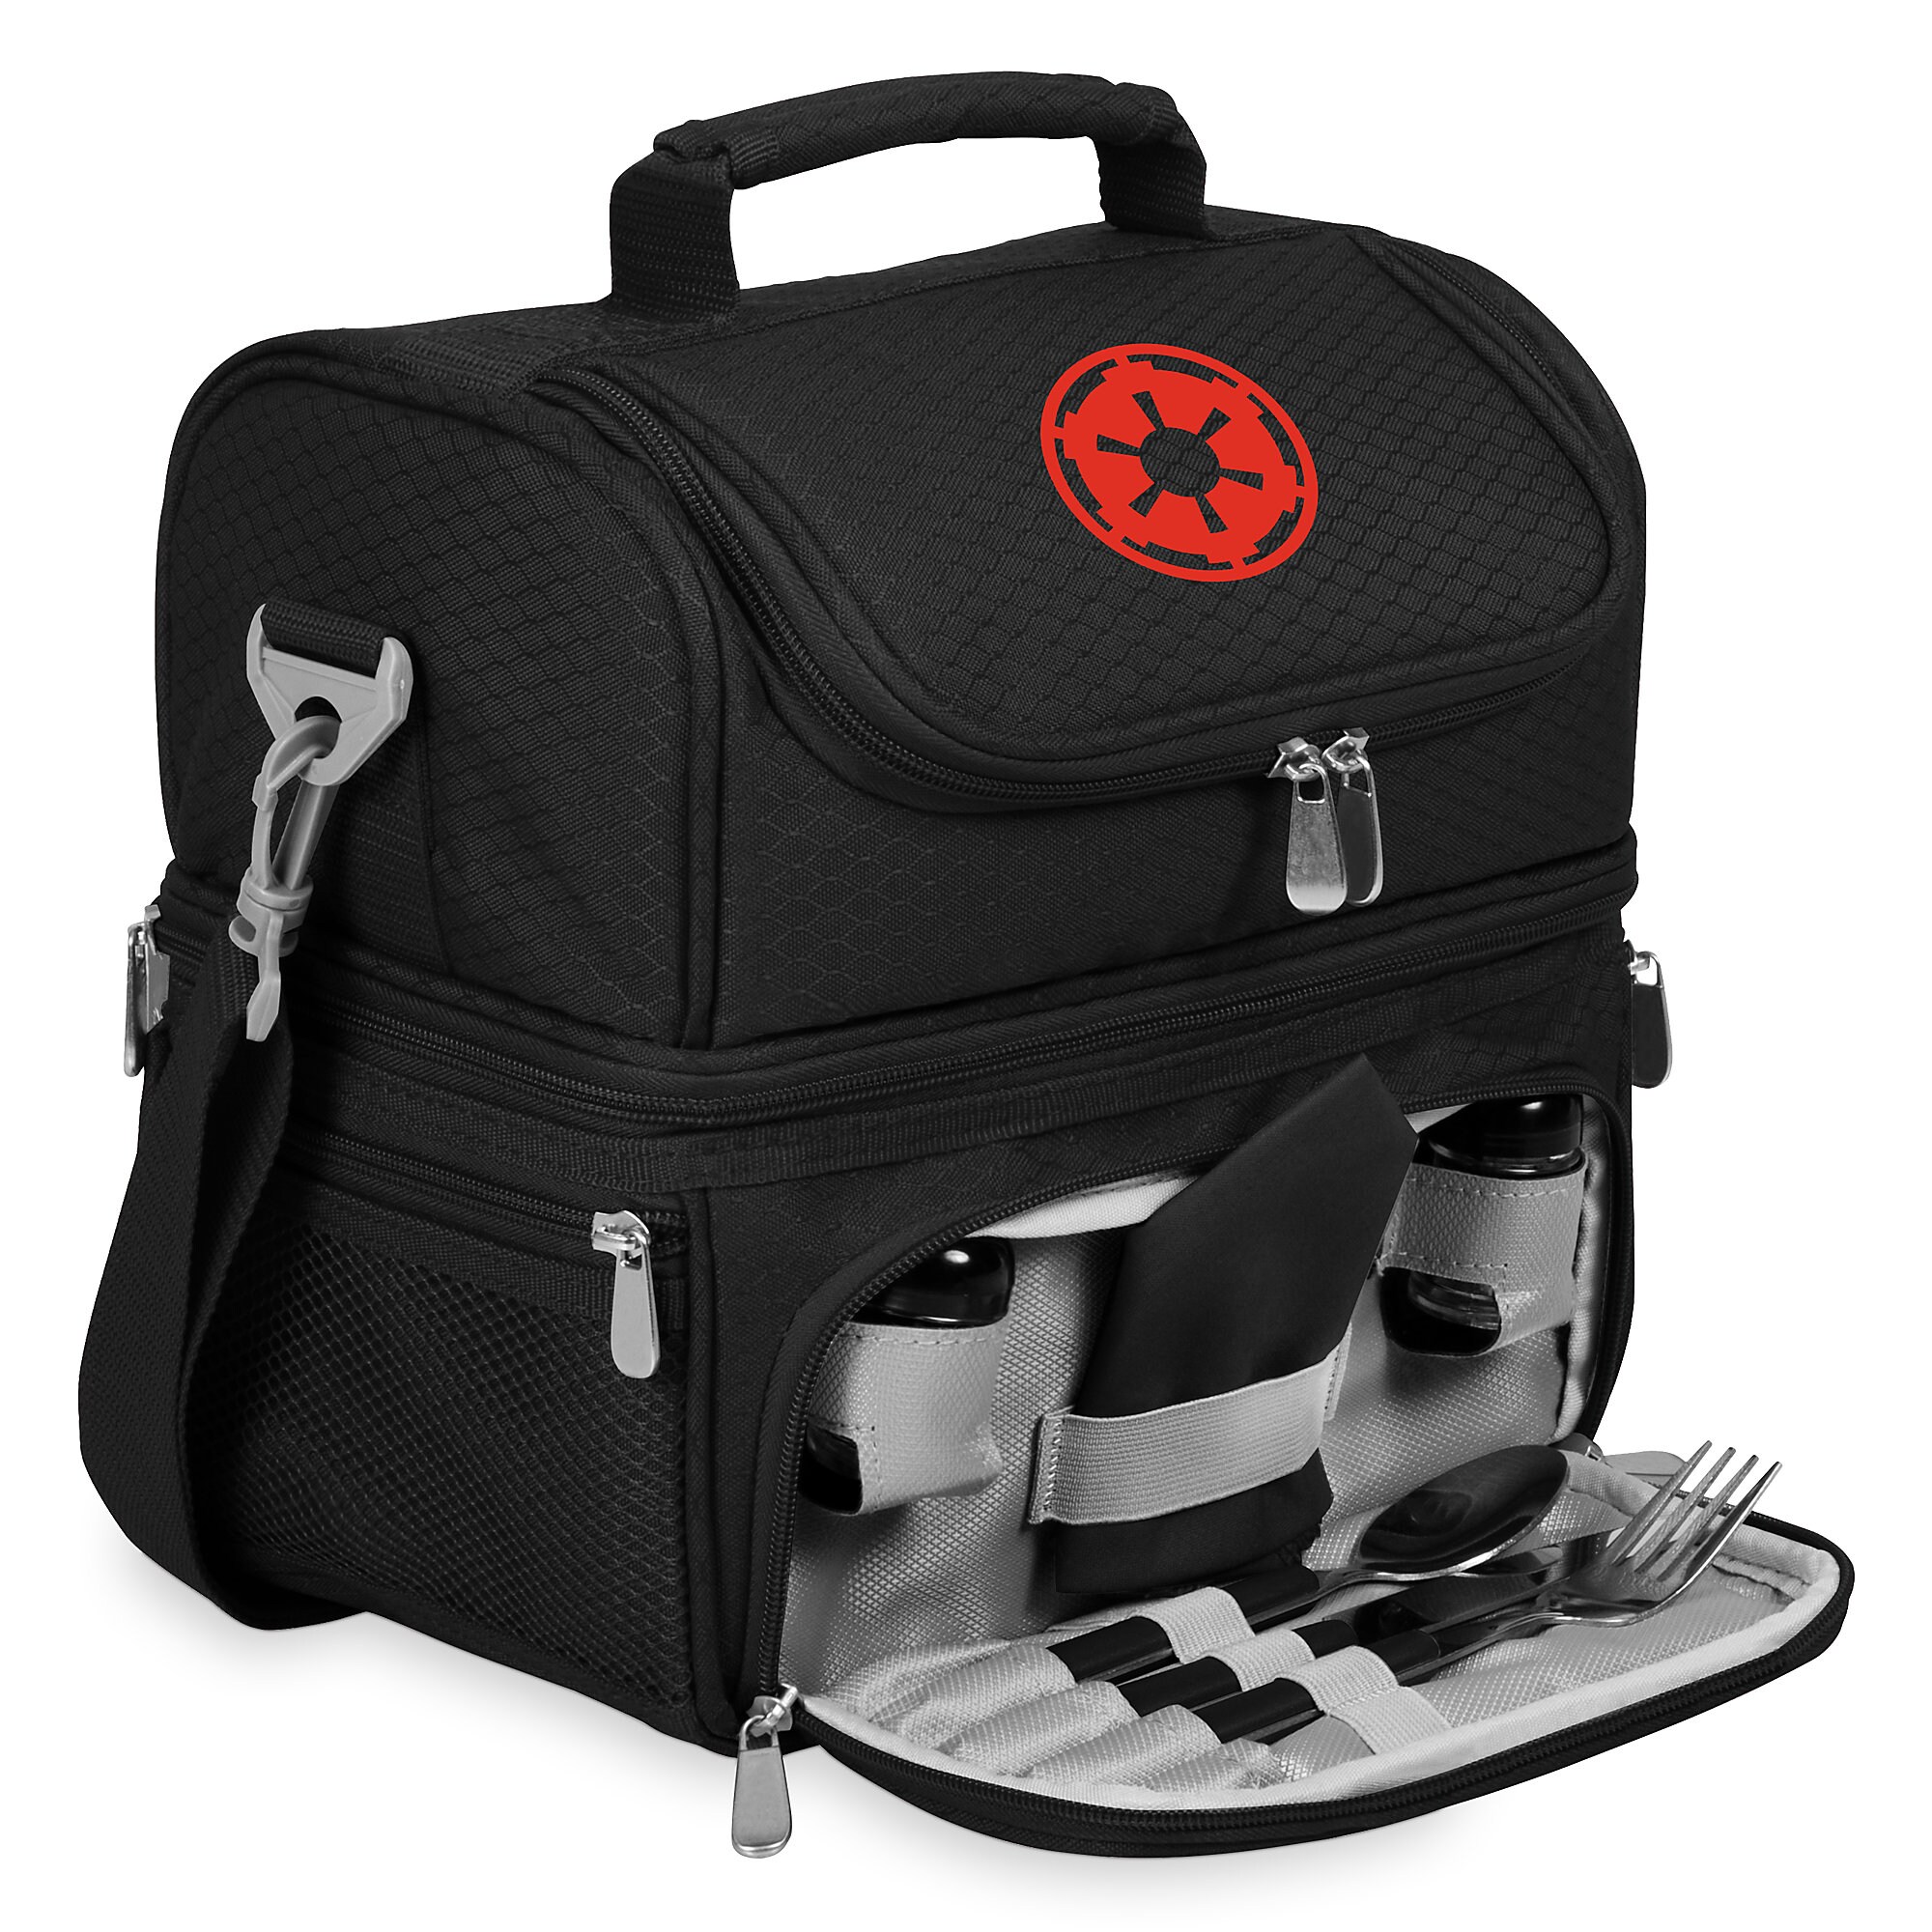 Darth Vader Lunch Tote